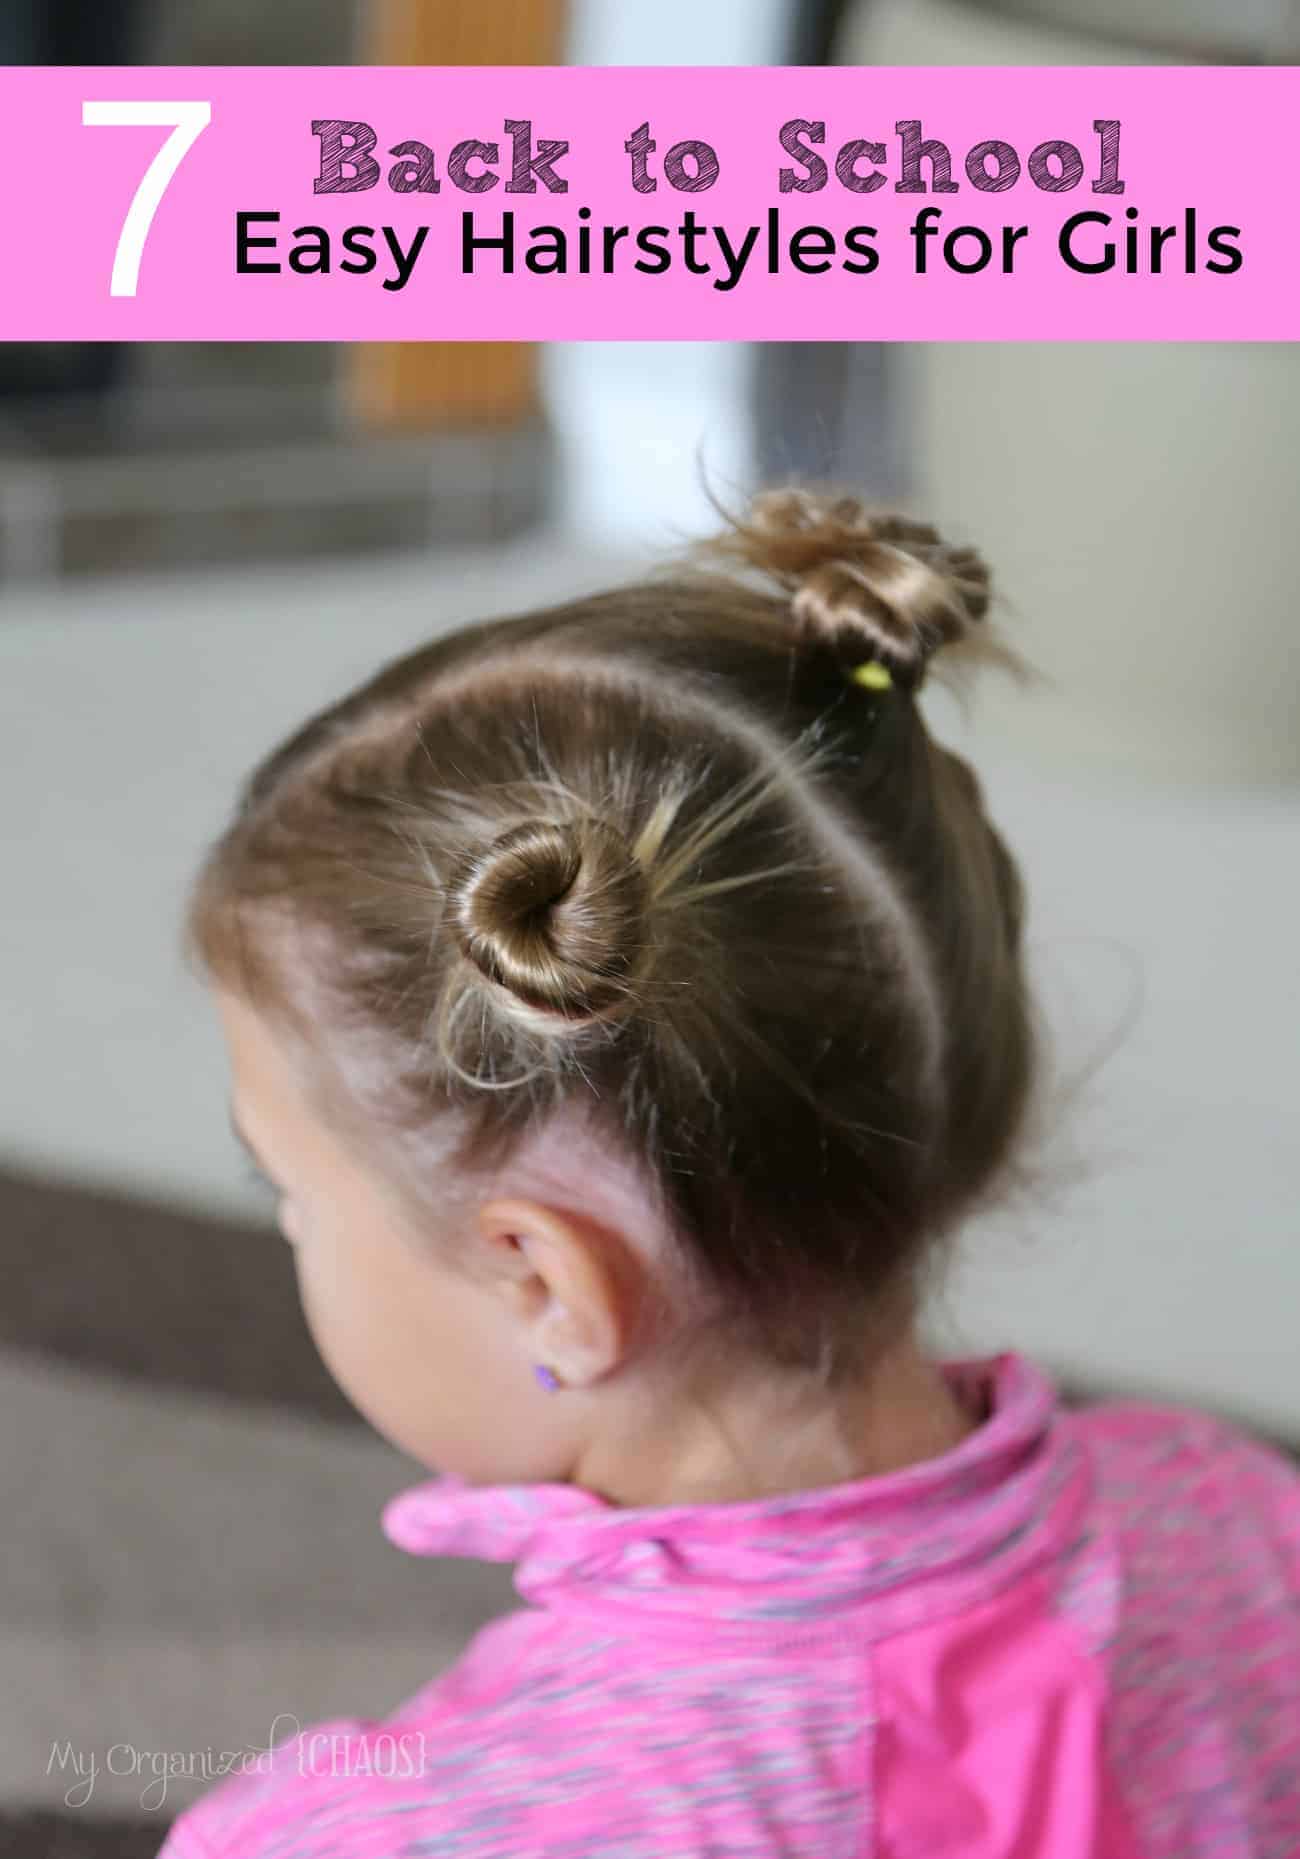 7 Back to School Easy Hairstyles for Girls